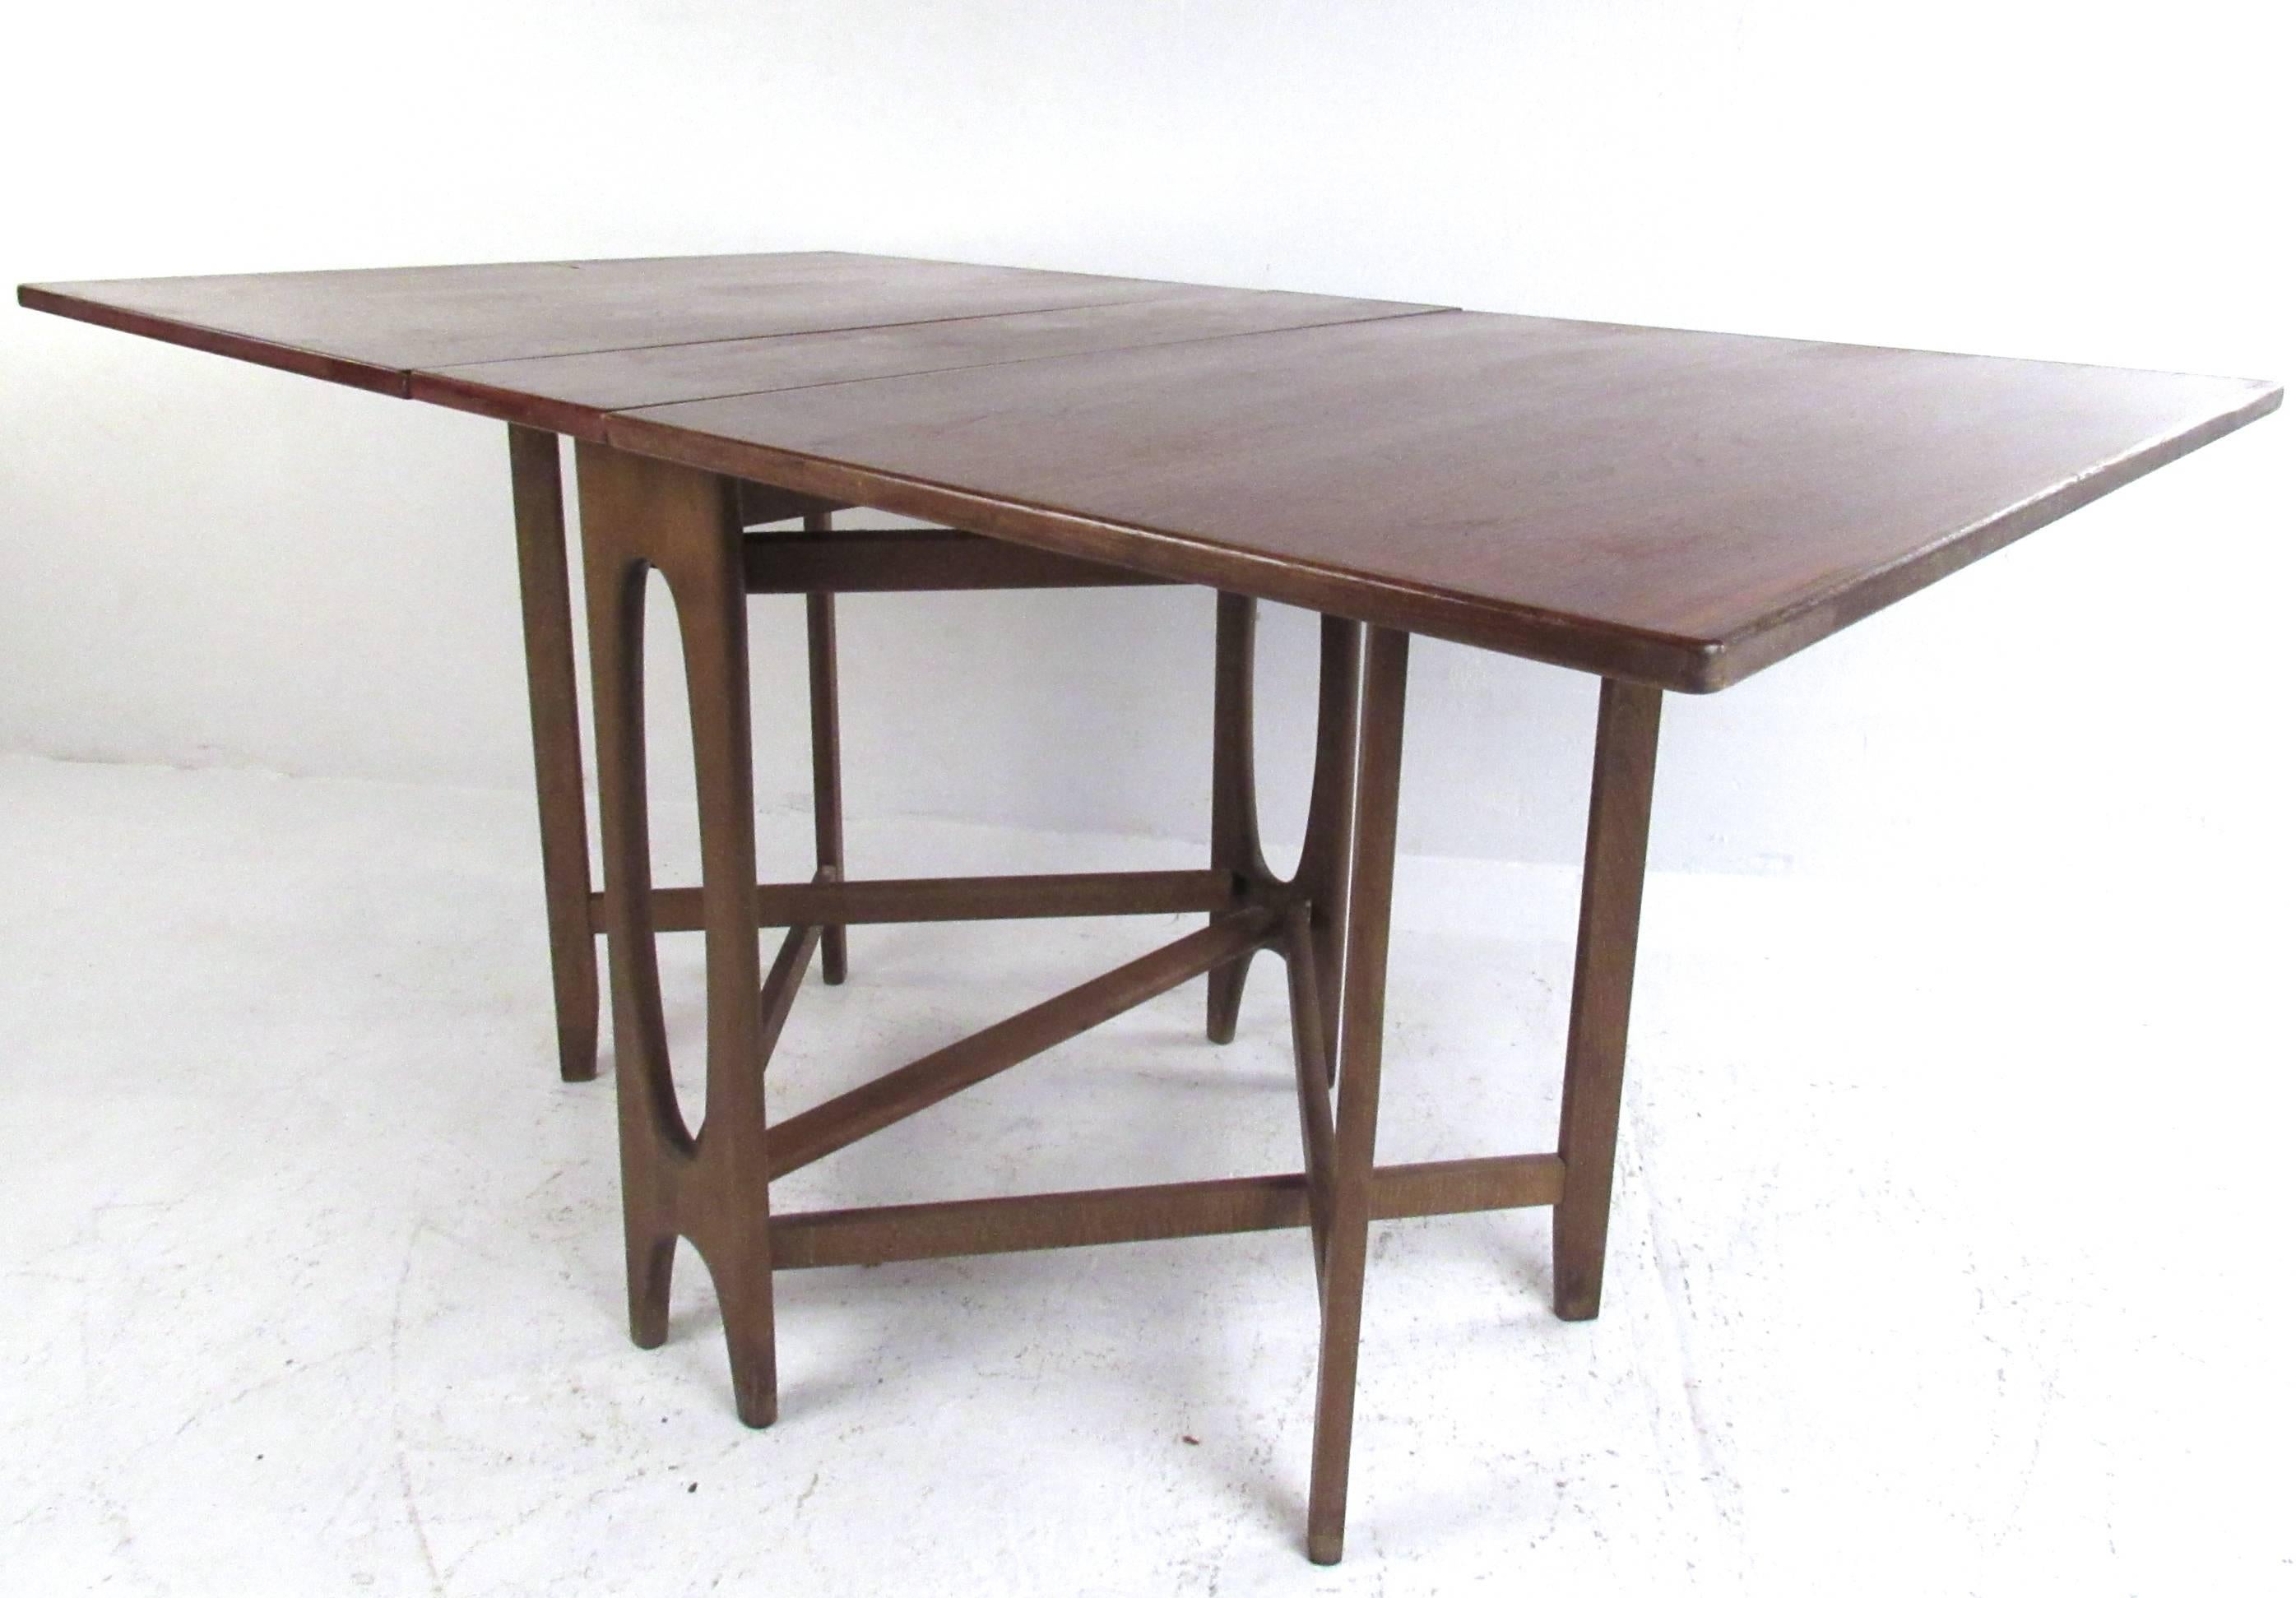 Mid-20th Century Mid-Century Drop Leaf Dining Table by Bendt Winge for Kleppe Møbelfabrikk